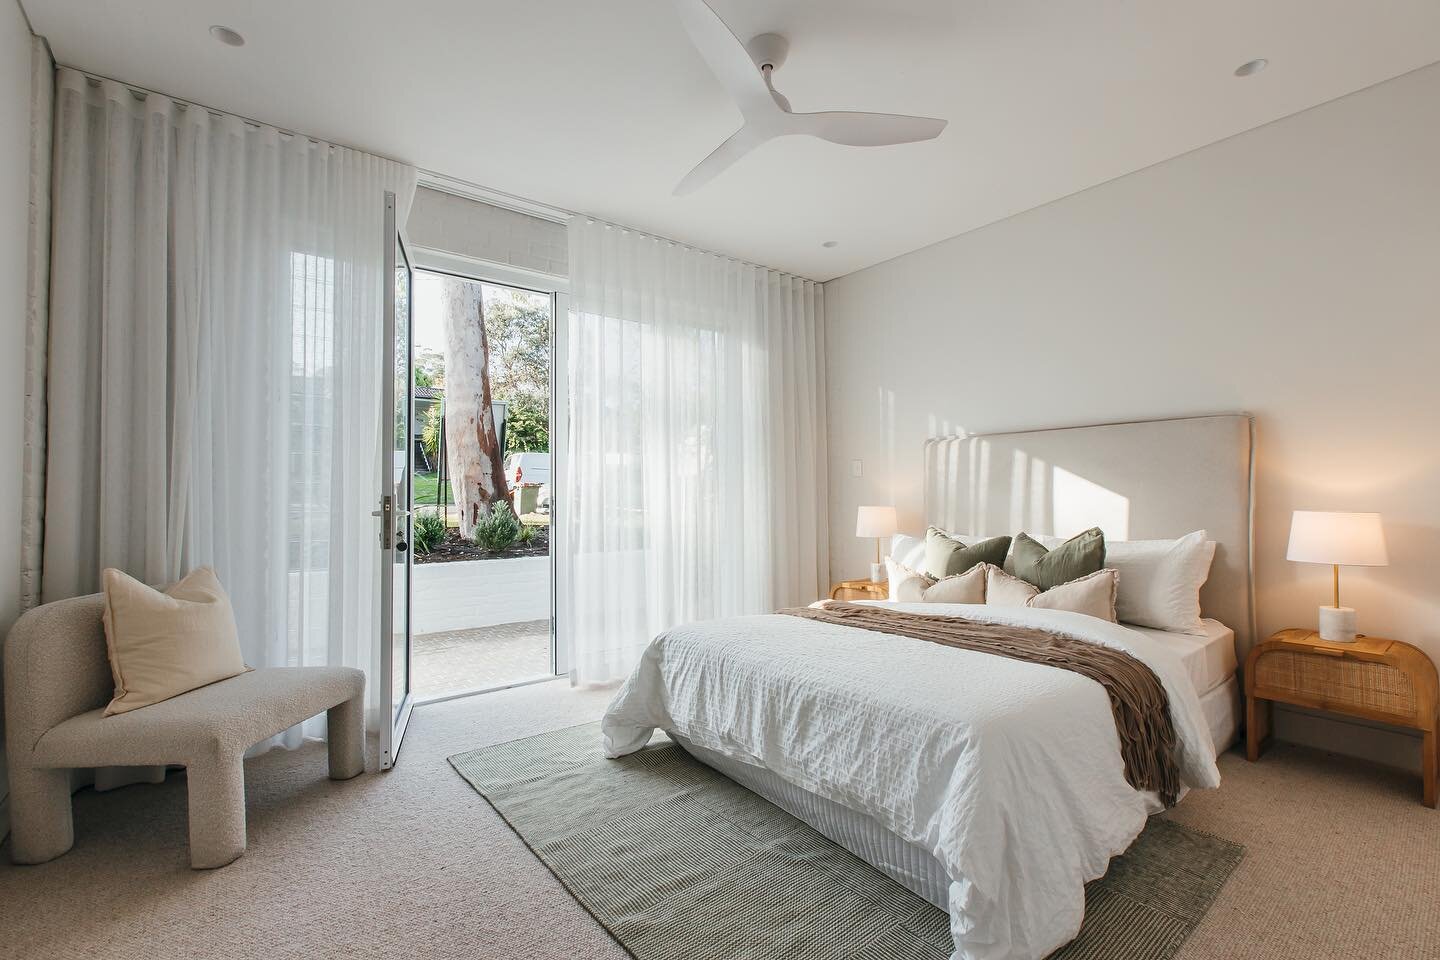 Our Bateay Bay project features shadow line skirting and shadow line ceiling throughout the home.

Pictured here is the guest suite with custom wardrobes. The guest suite looks on to the front garden and also features an ensuite.